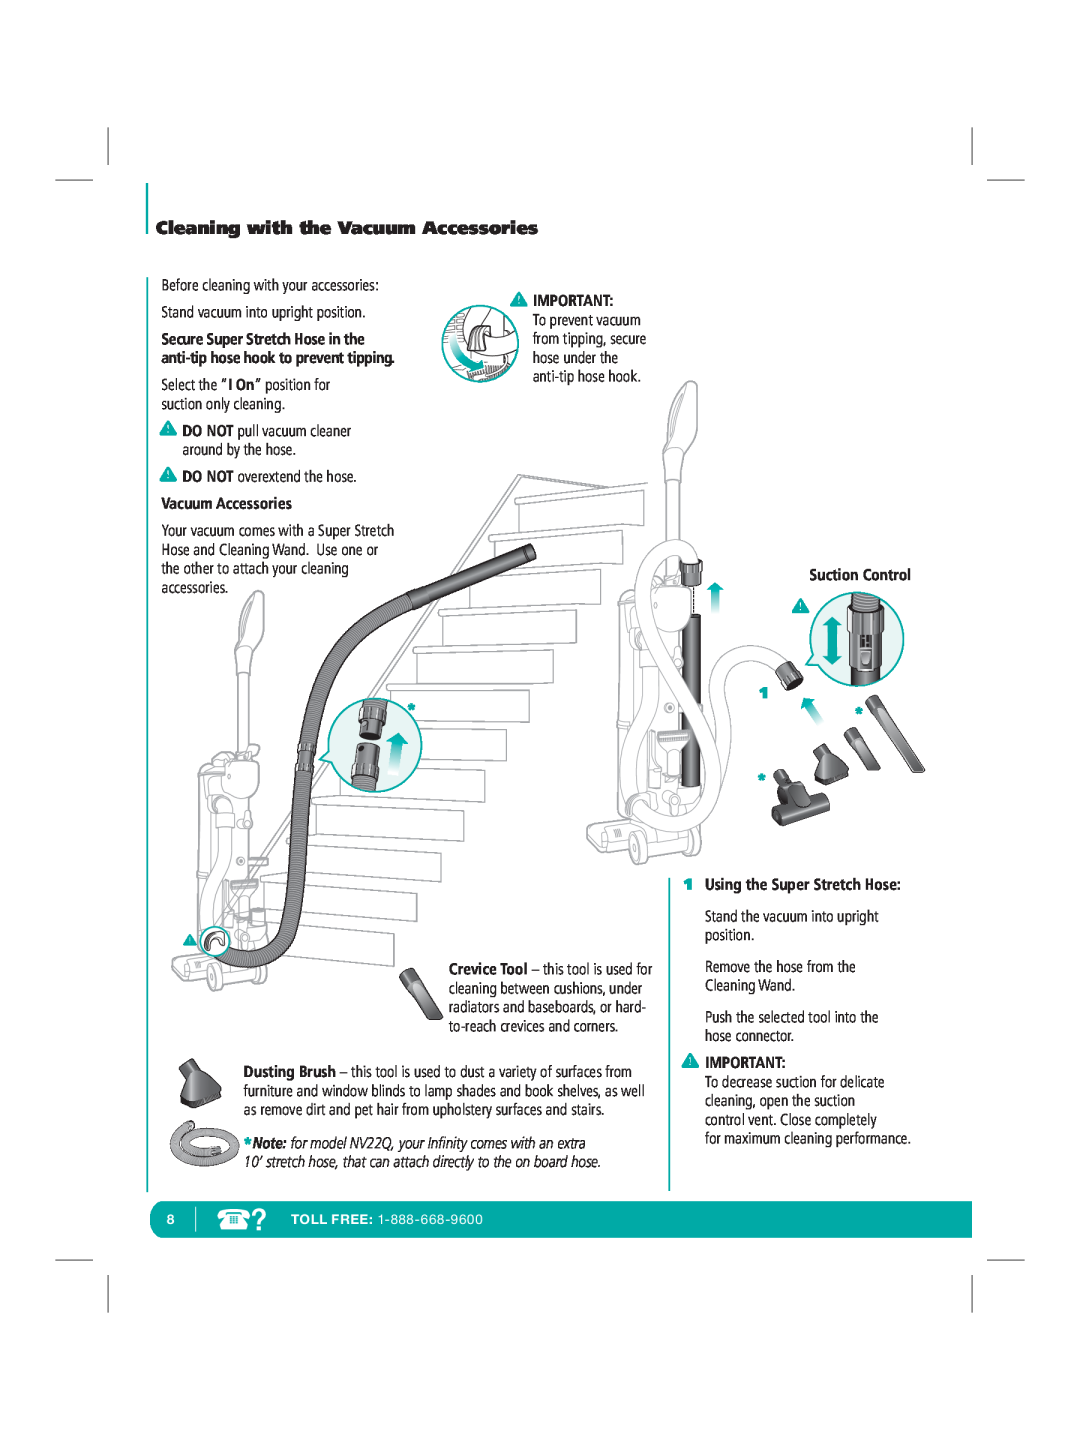 Infinity NV22Q manual Vacuum Accessories, Suction Control, 1Using the Super Stretch Hose 